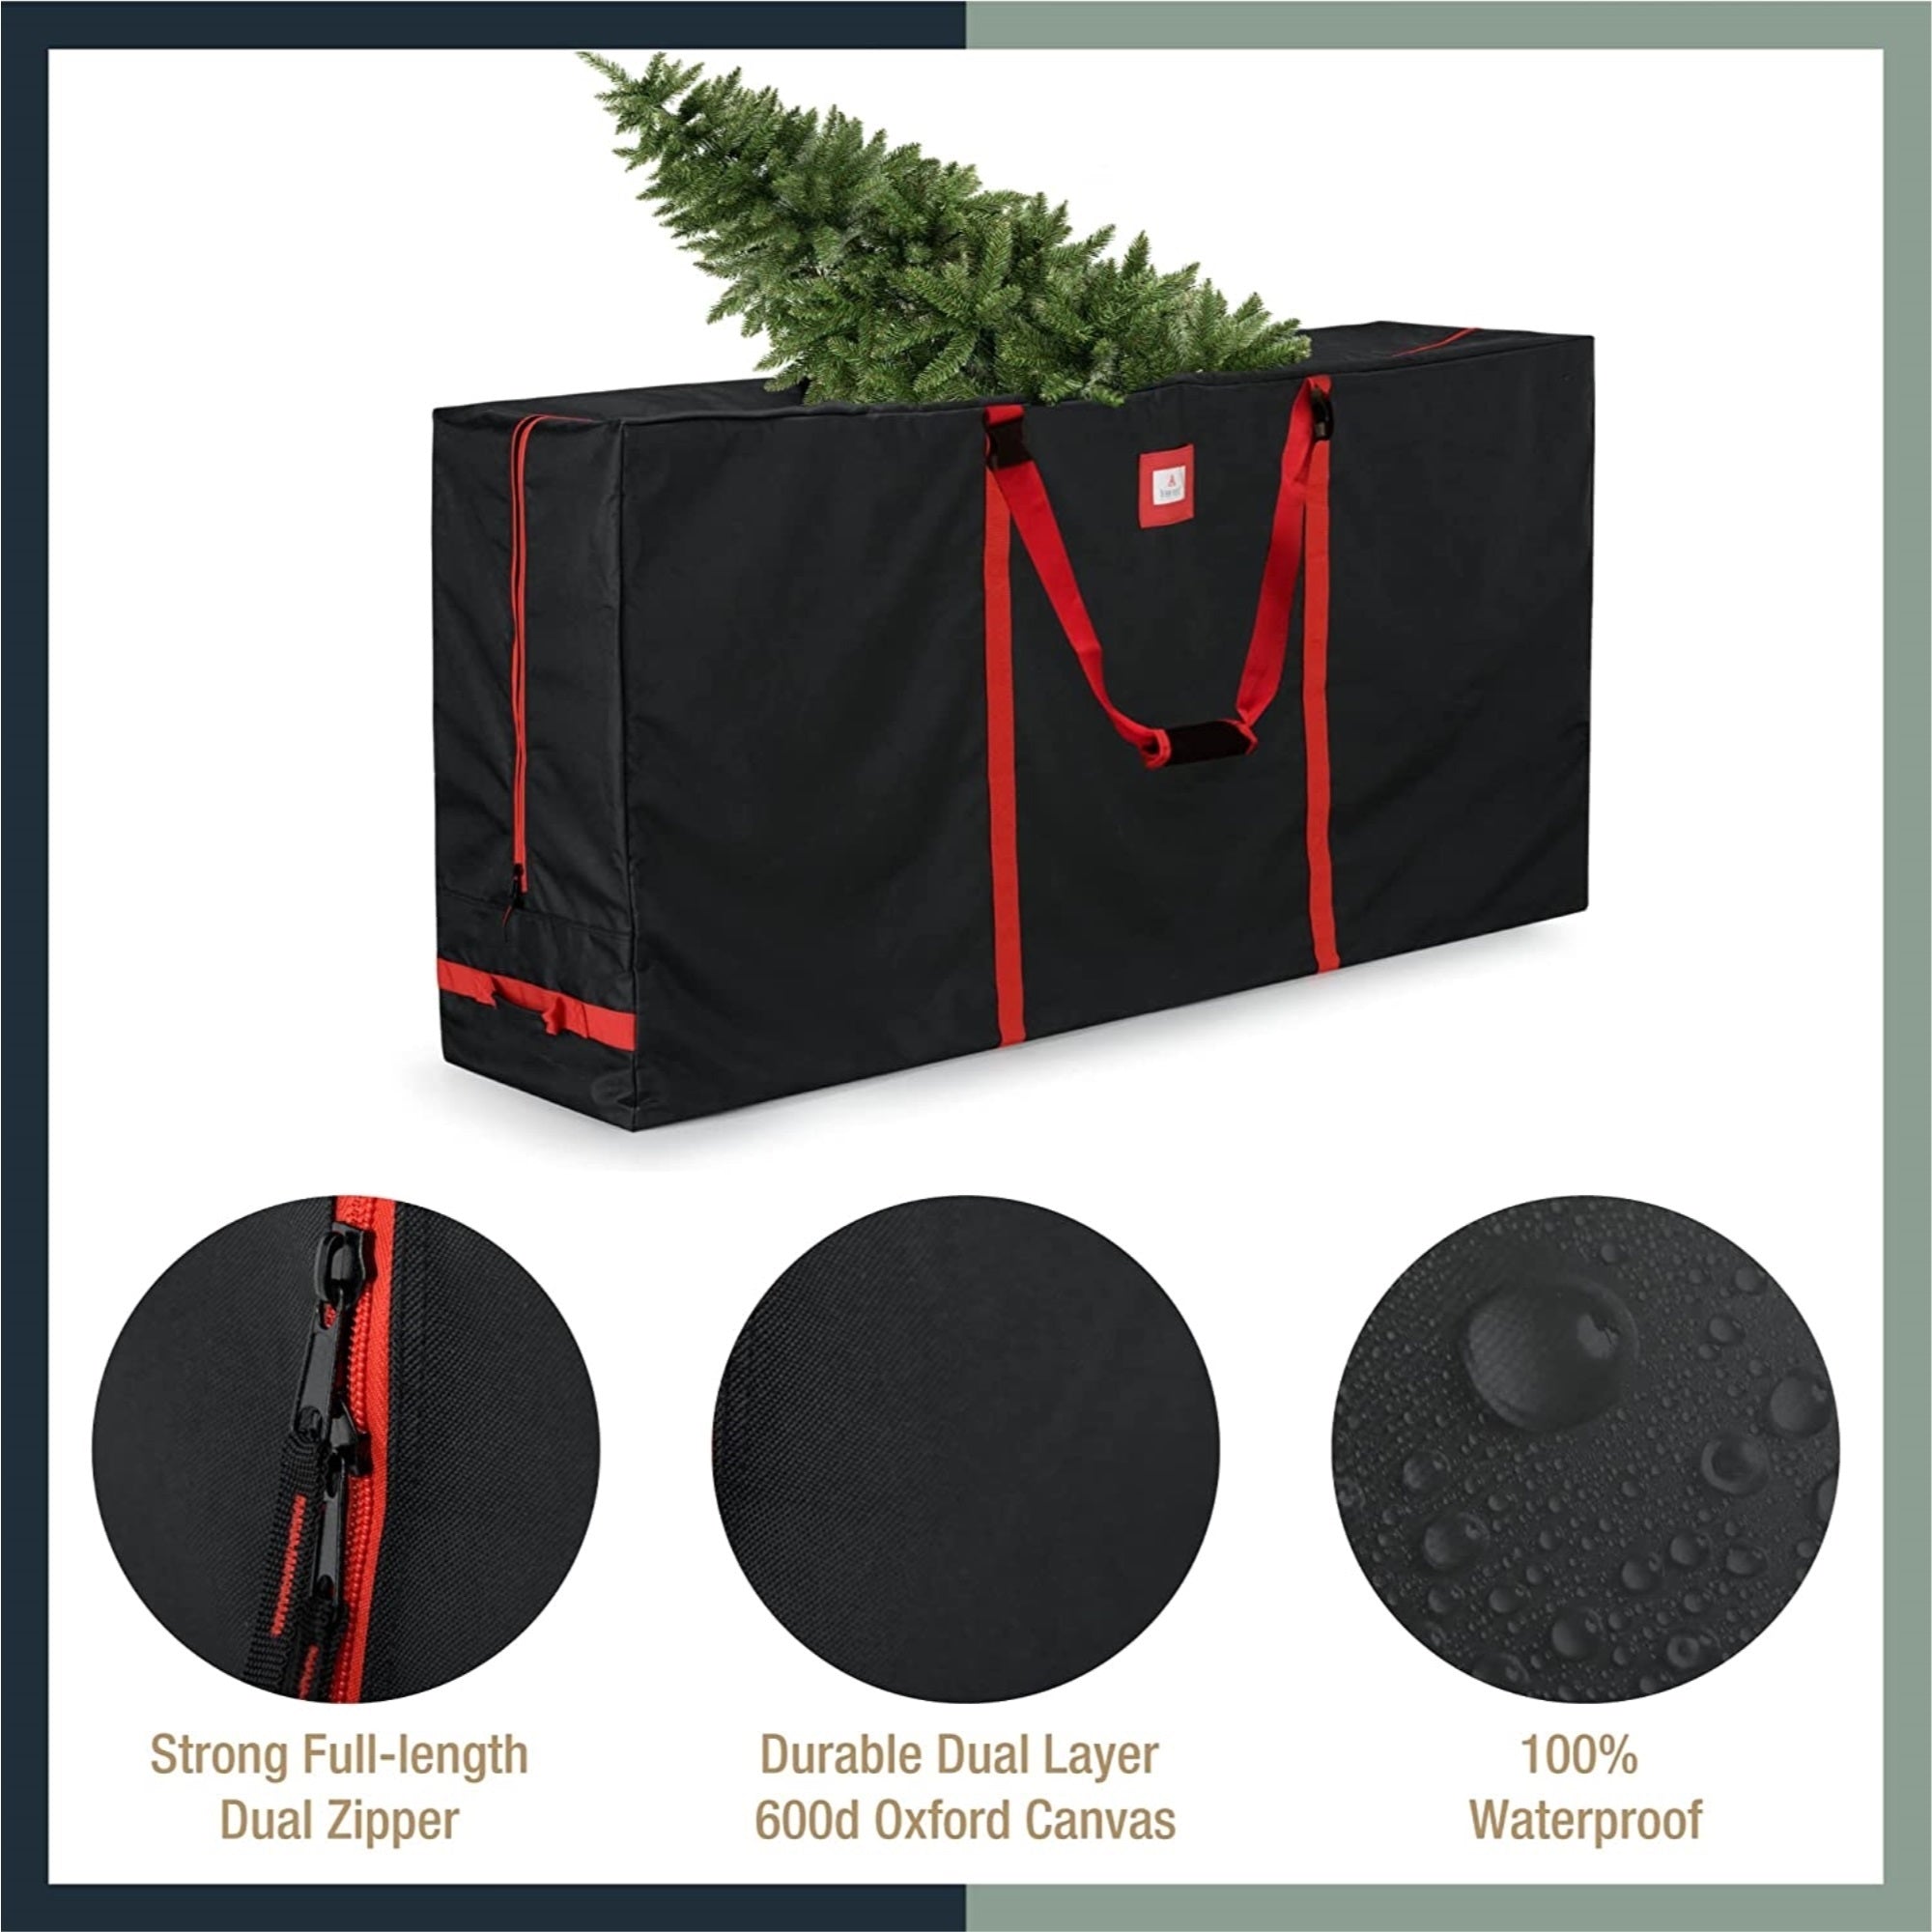 Tree Nest Artificial Christmas Tree Storage Bag For 9ft Christmas Tree Waterproof Box, Canvas Oxford Fabric, Black